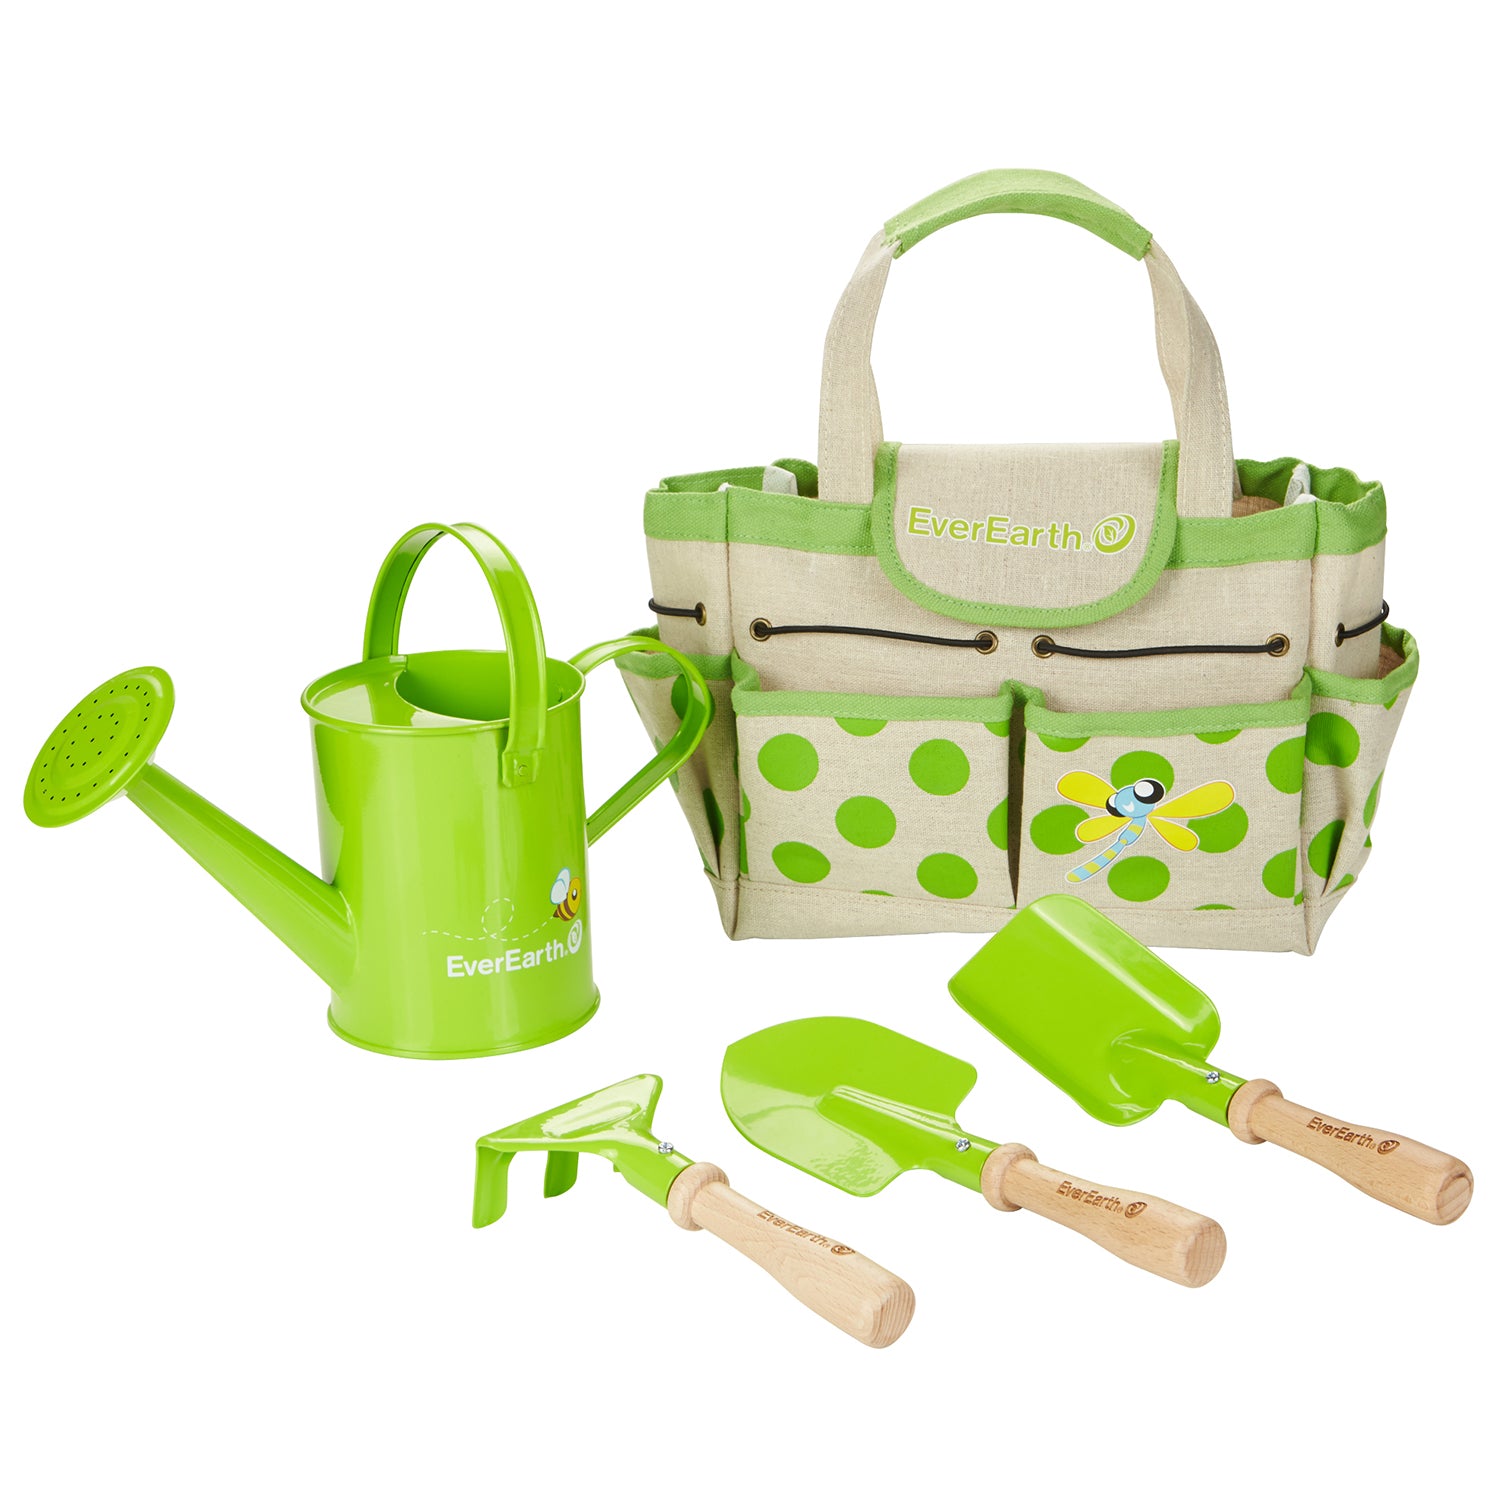 Everearth Garden Bag with Watering Can and Tools - K and K Creative Toys